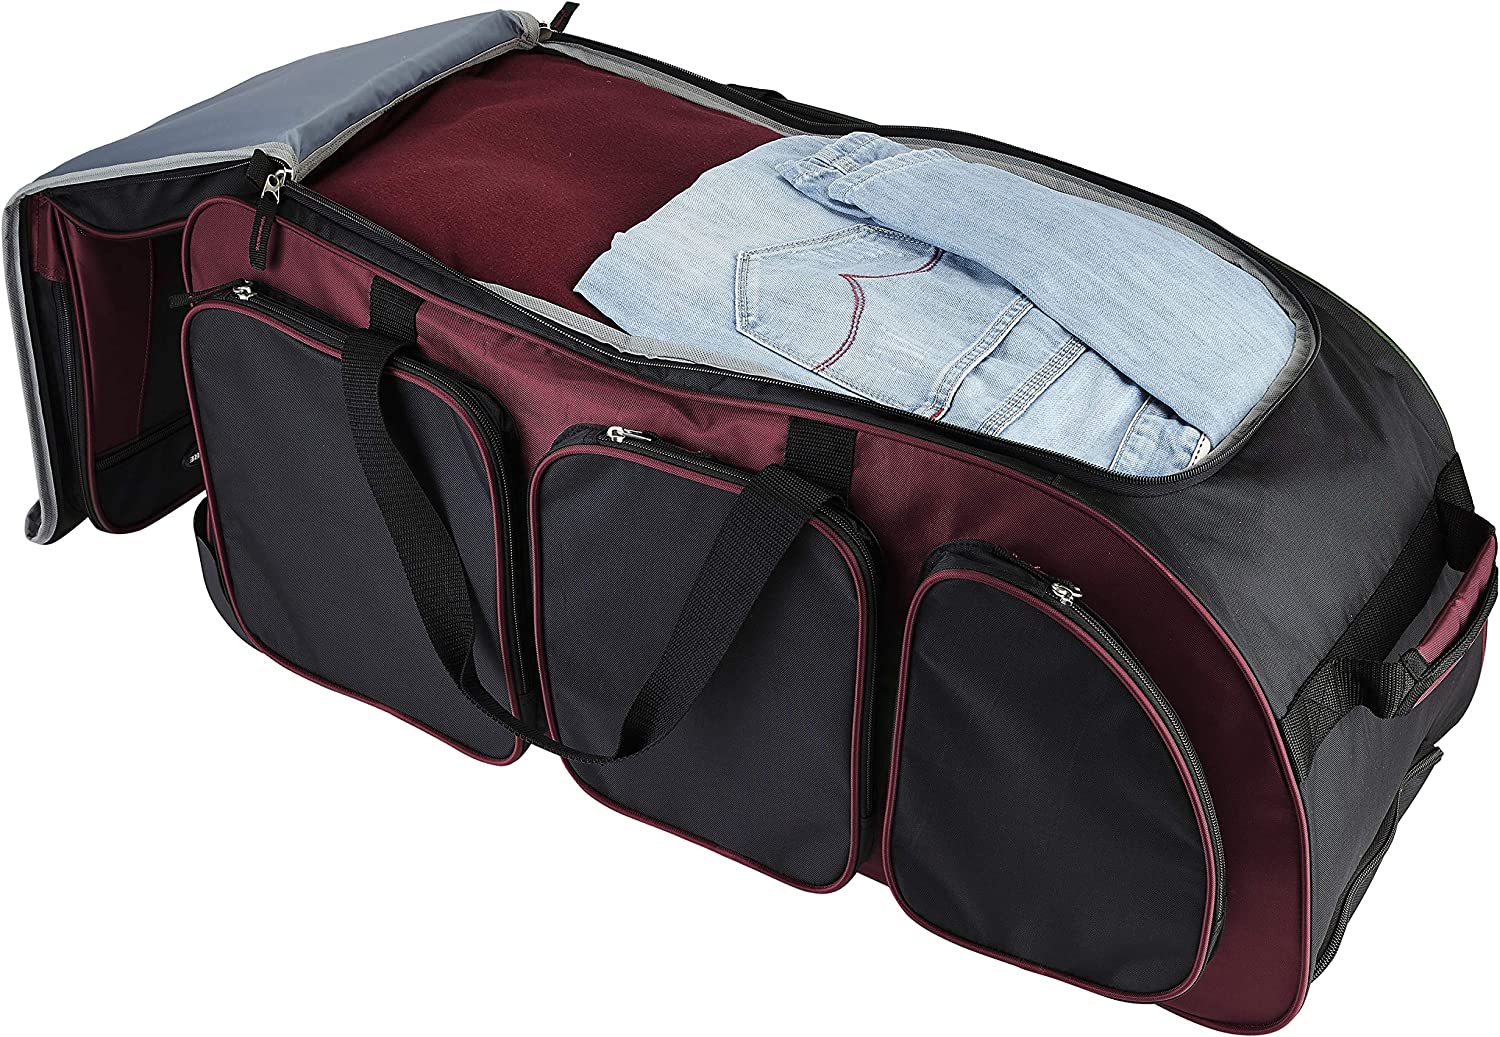 Travelers Club Xpedition 30 Inch Multi-Pocket Upright Rolling Duffel Bag